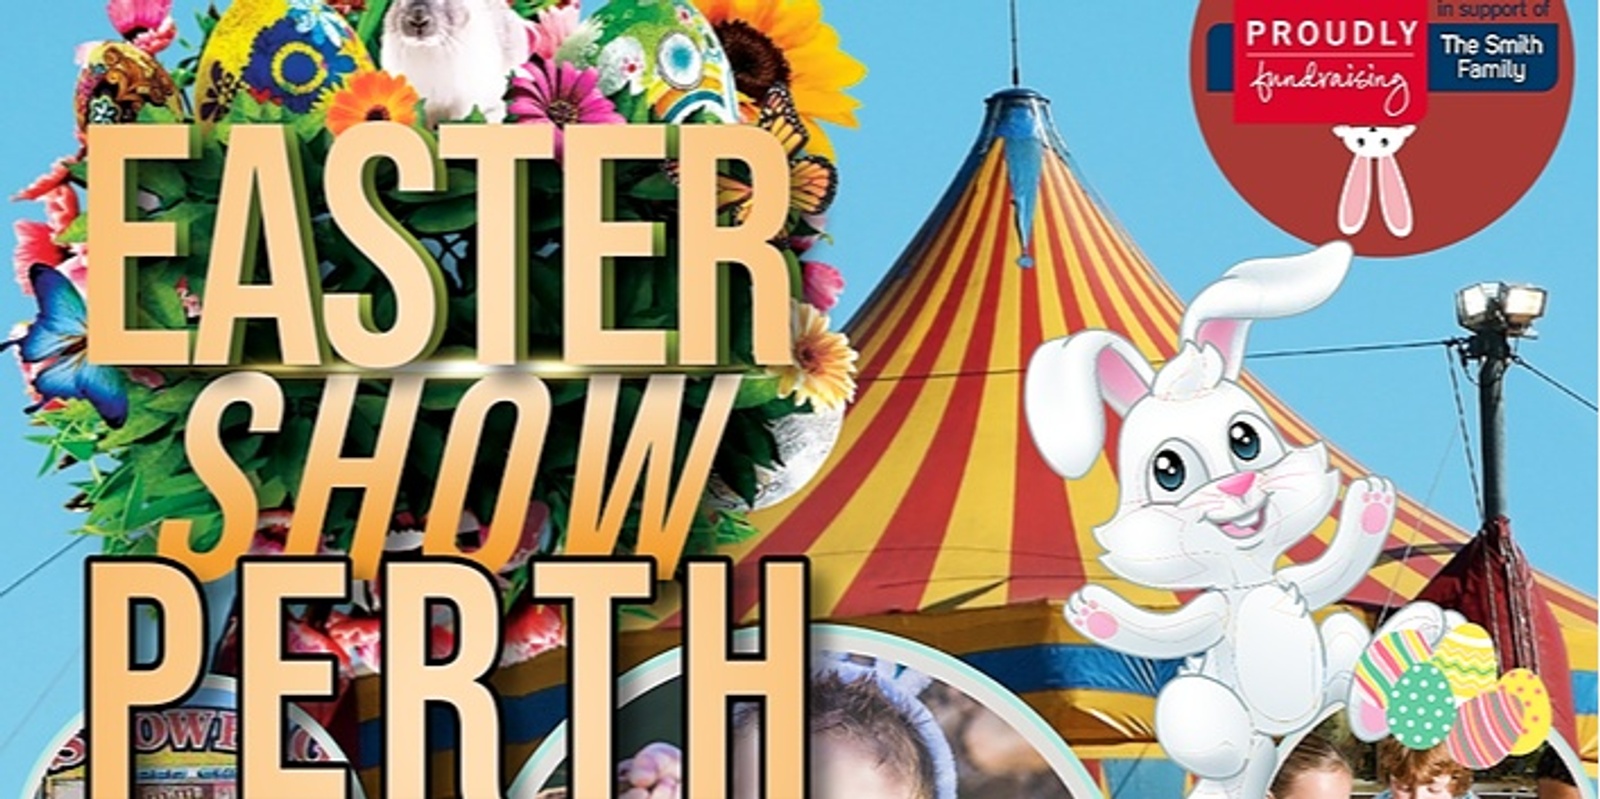 Banner image for Easter Show Perth